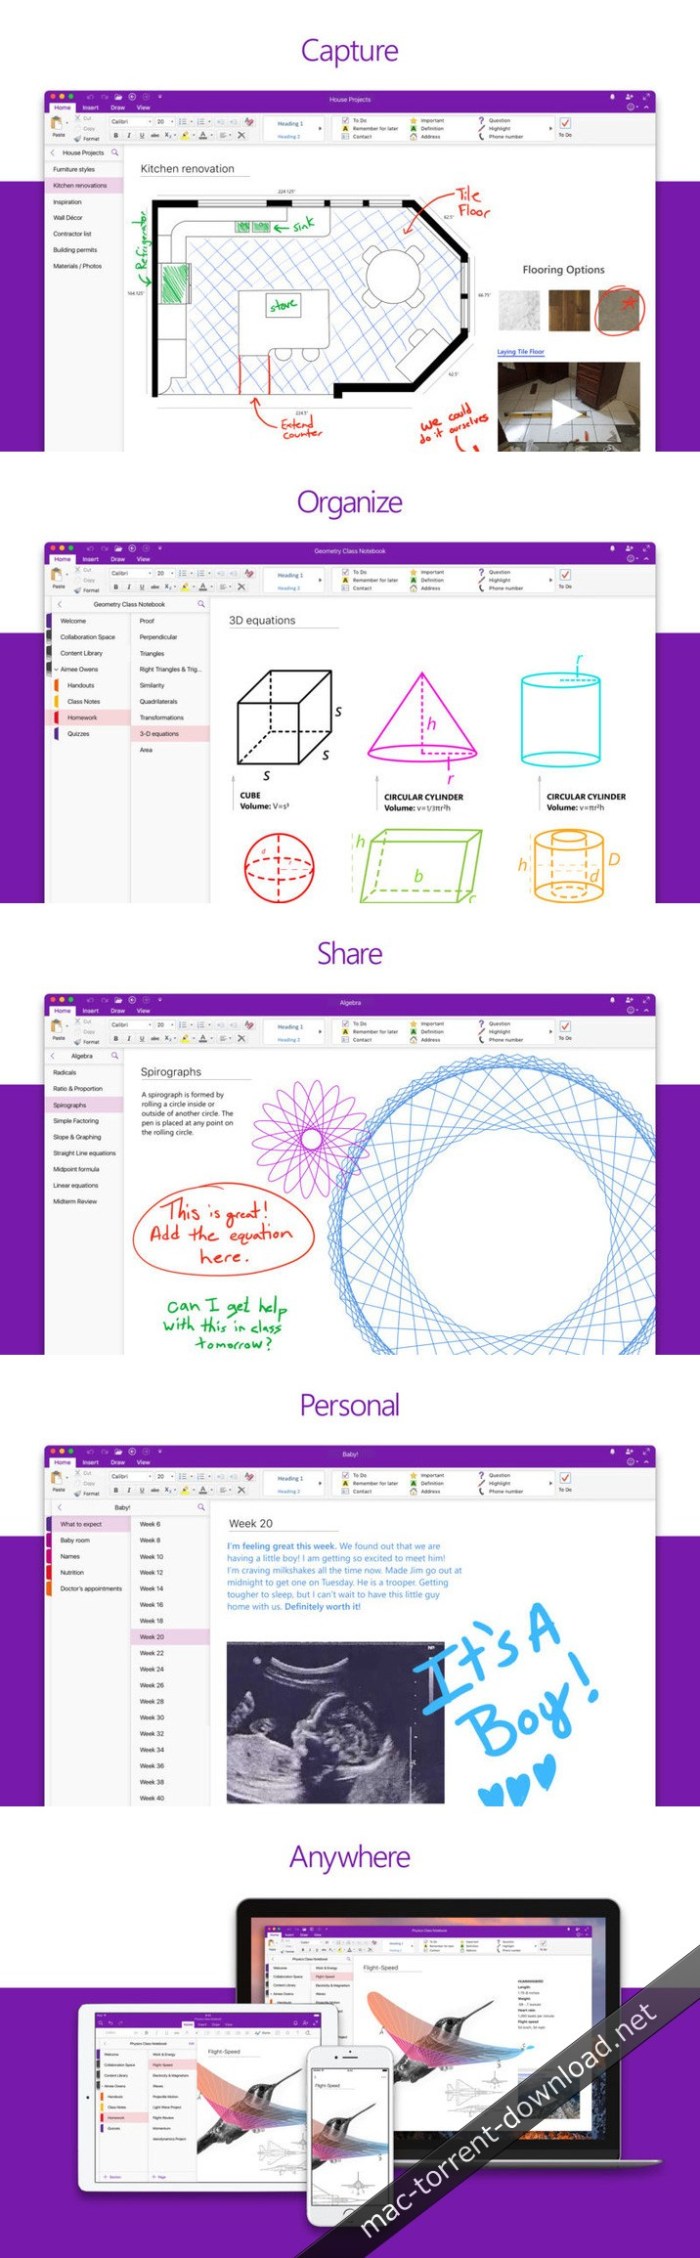 Microsoft onenote for mac 2014 torrent download